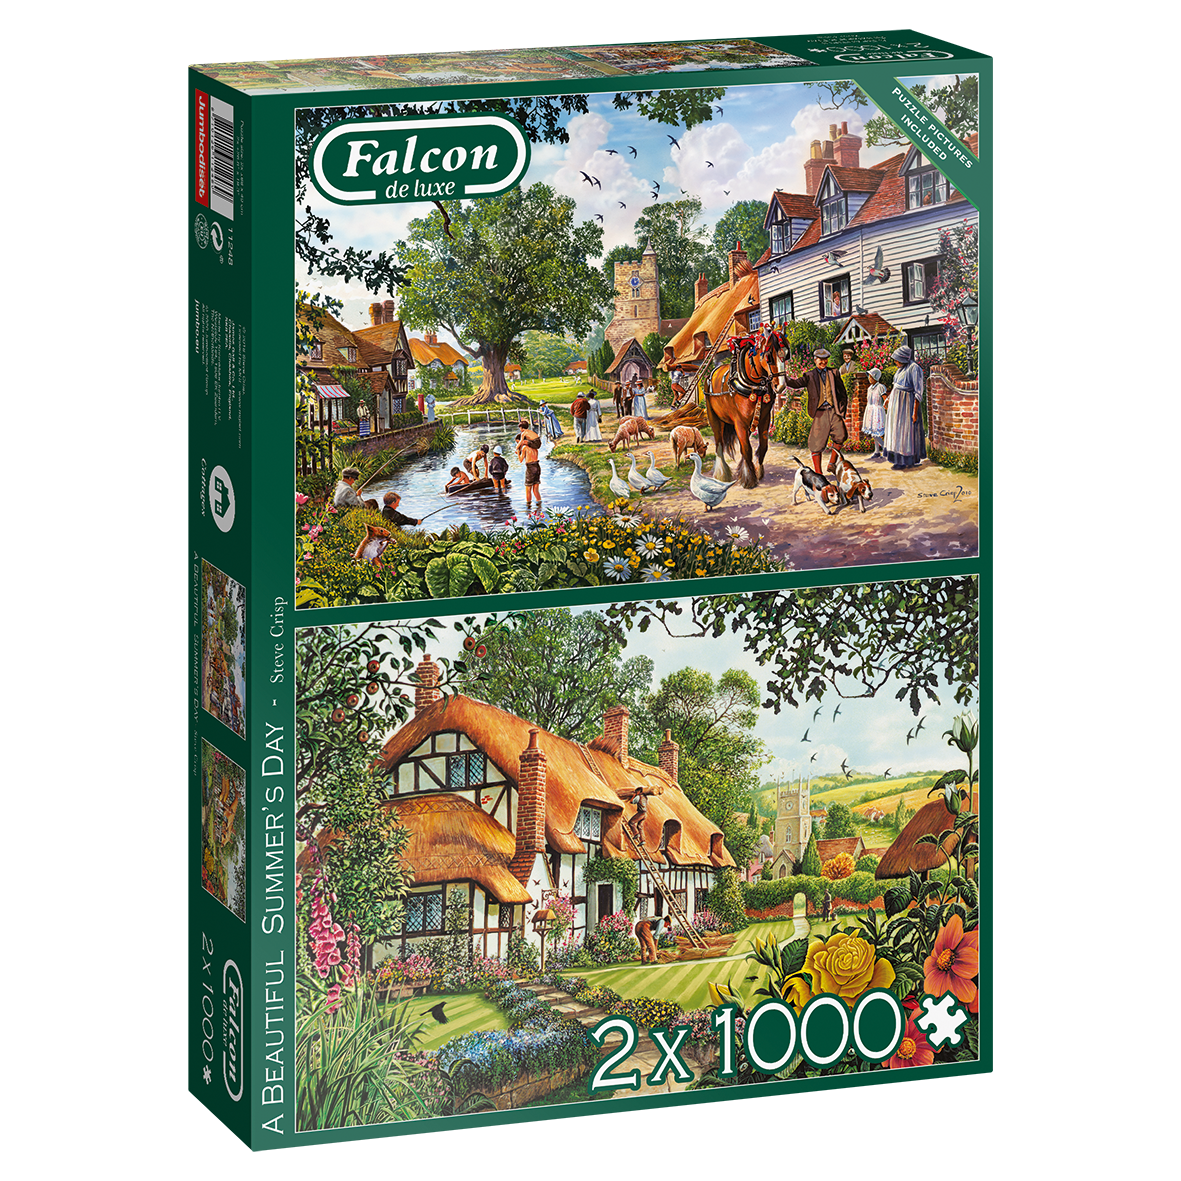 2 x 1000 Piece Falcon deluxe Jigsaw Puzzles Summers Day Church & Village 11248 